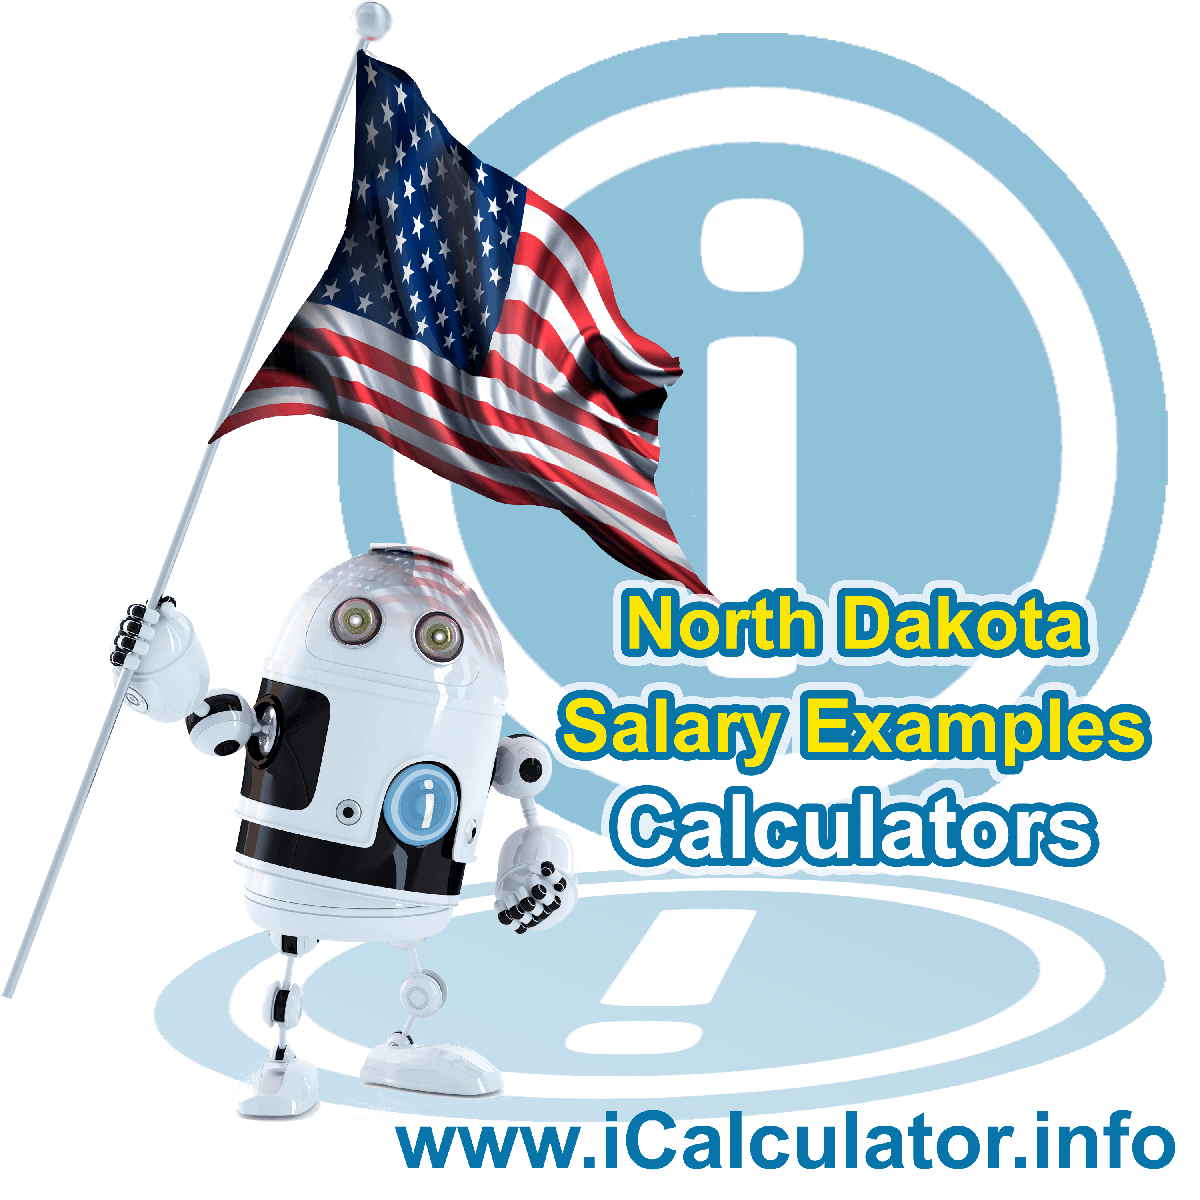 North Dakota Salary Example for $ 50,000.00 in 2023 | iCalculator™ | $ 50,000.00 salary example for employee and employer paying North Dakota State tincome taxes. Detailed salary after tax calculation including North Dakota State Tax, Federal State Tax, Medicare Deductions, Social Security, Capital Gains and other income tax and salary deductions complete with supporting North Dakota state tax tables 